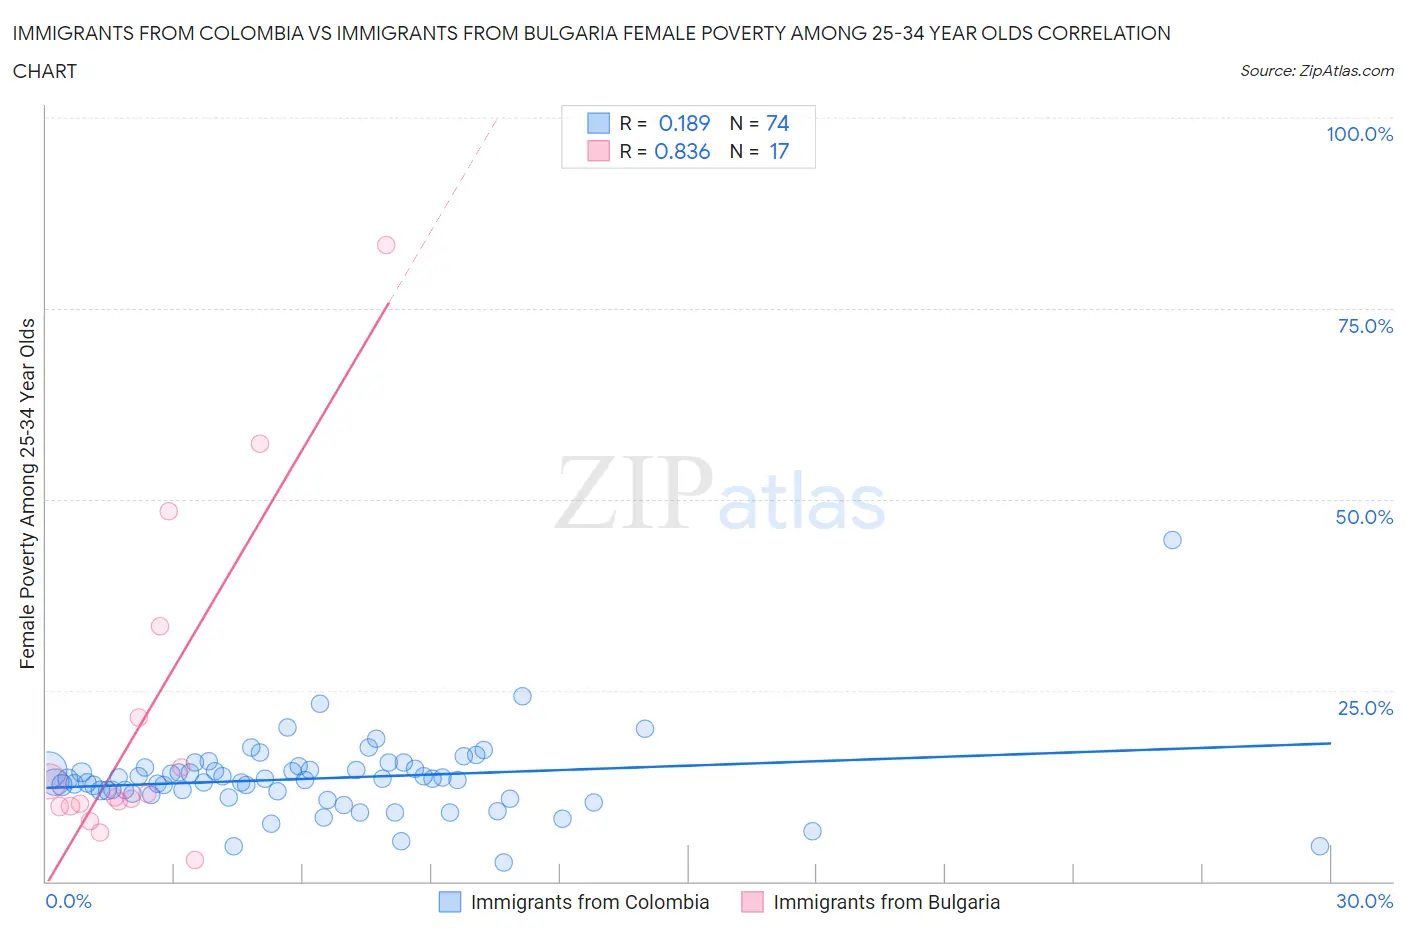 Immigrants from Colombia vs Immigrants from Bulgaria Female Poverty Among 25-34 Year Olds